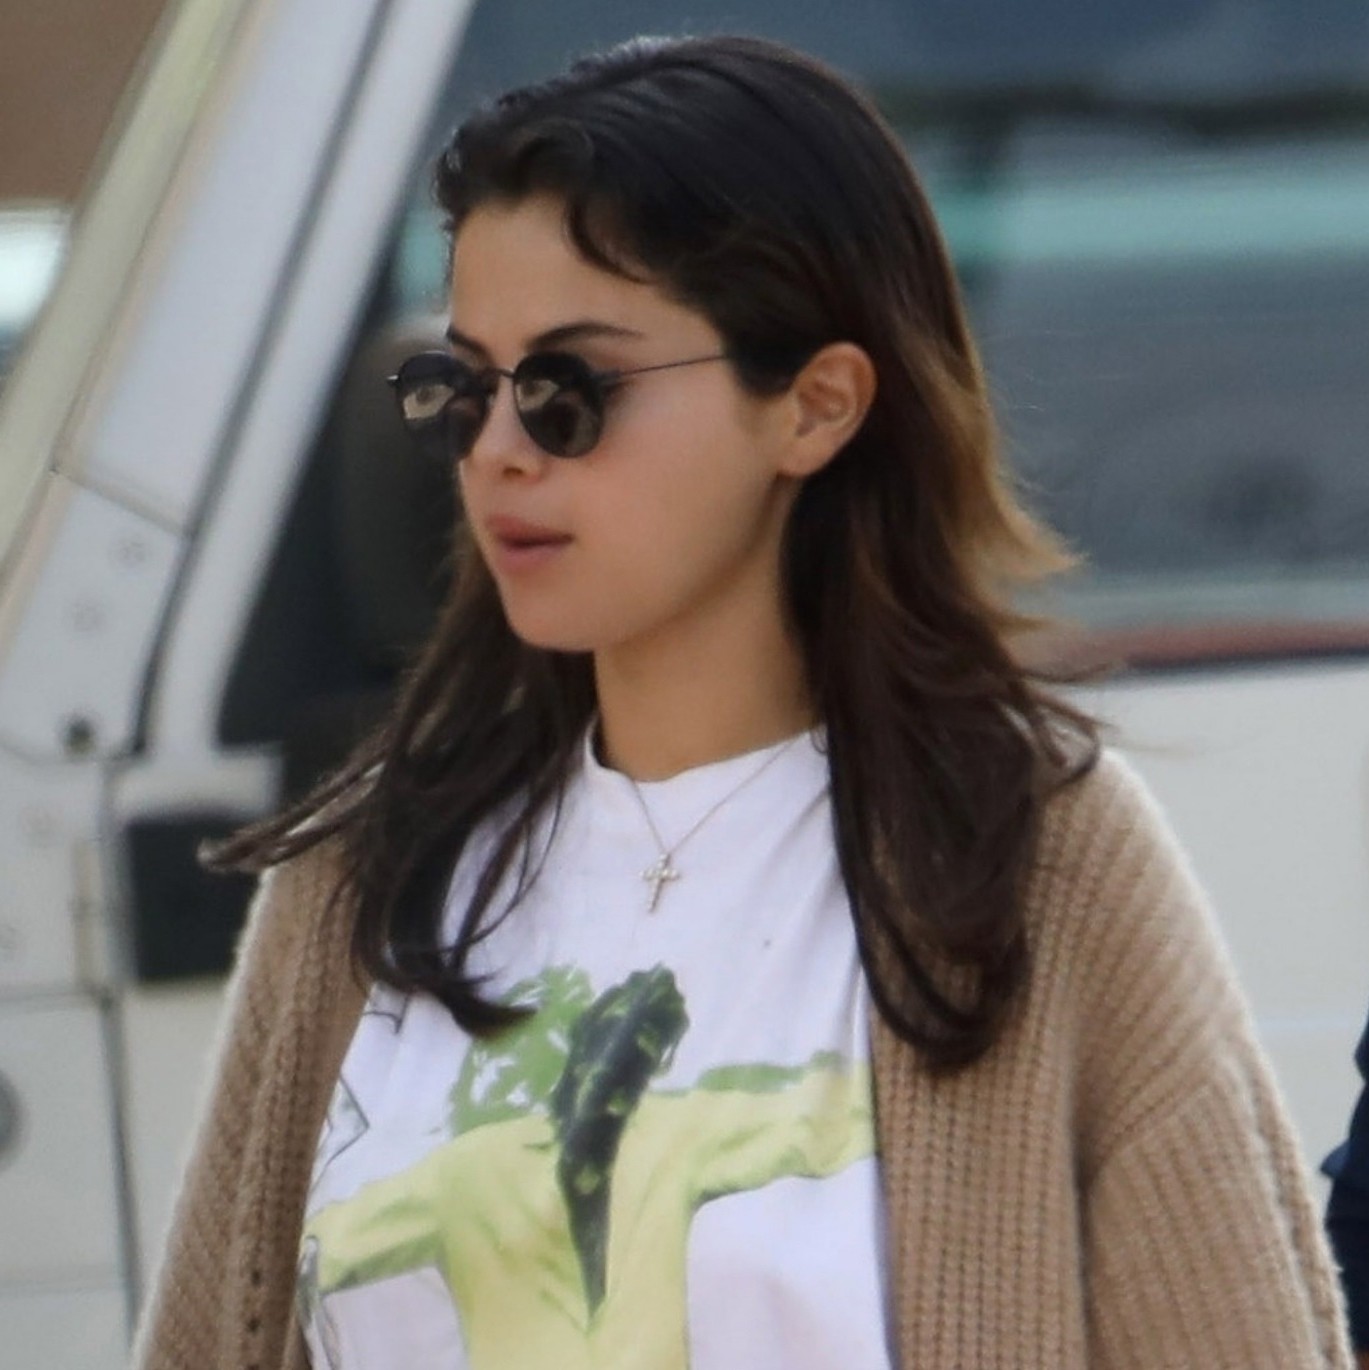 Studio City, CA  - *EXCLUSIVE* Selena Gomez looks somber as she steps out barefooted for breakfast with friends. Selena wears a "Keep The Faith" t-shirt and is seen giving a big hug to a friend as she heads out.Pictured: Selena GomezBACKGRID USA 25 JU (Foto: Vasquez-Max Lopes / BACKGRID)